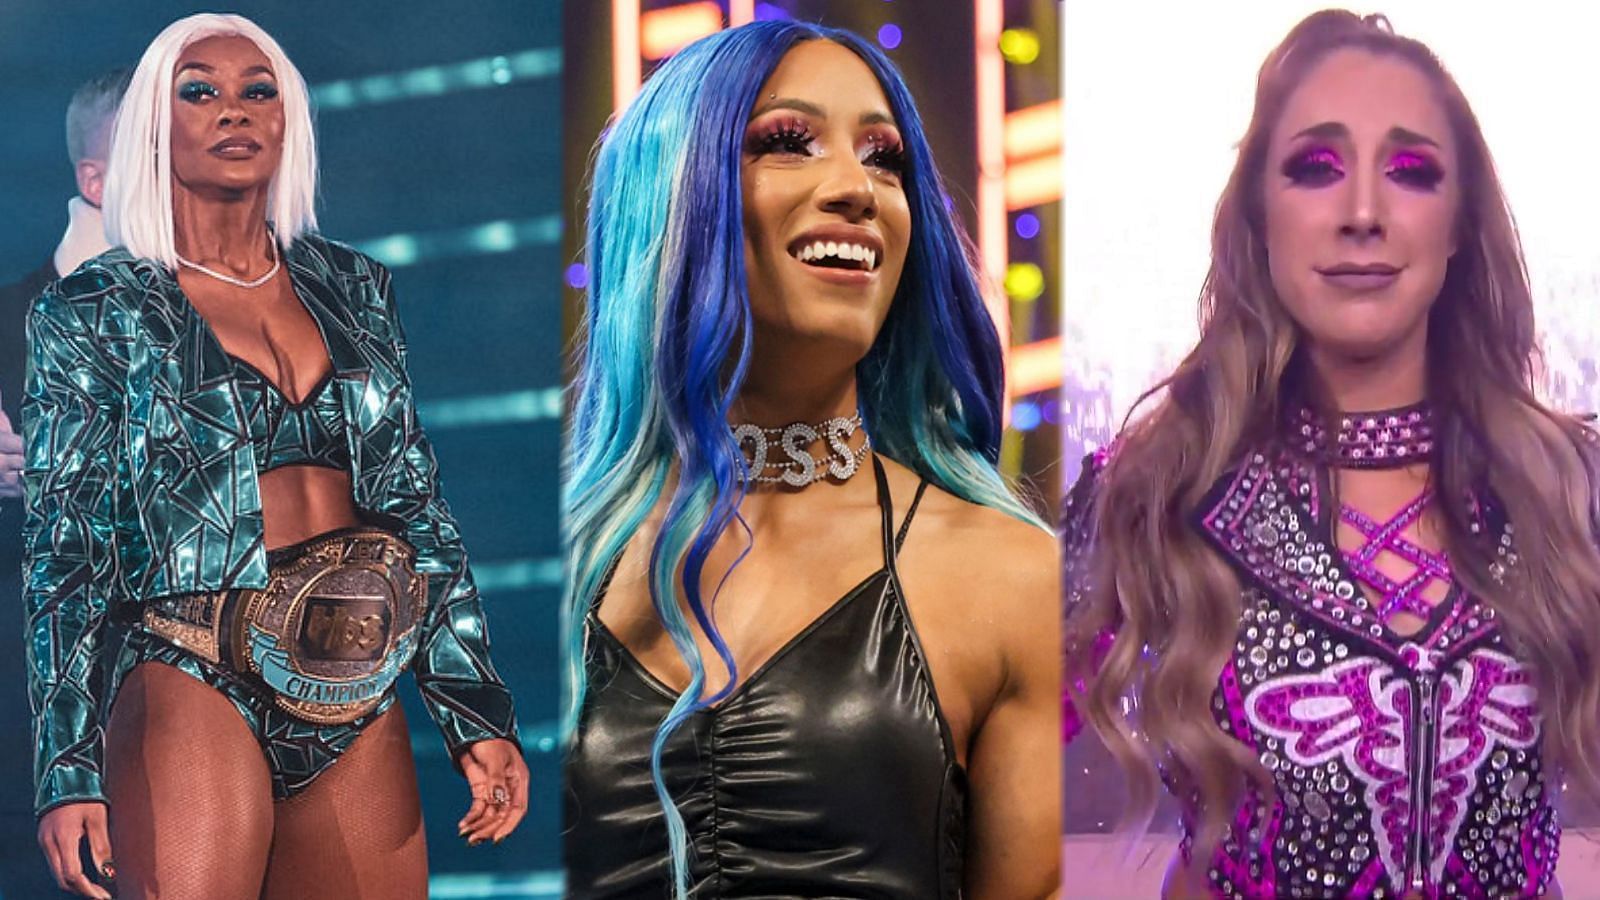 Will The Boss end up facing these stars in AEW soon?